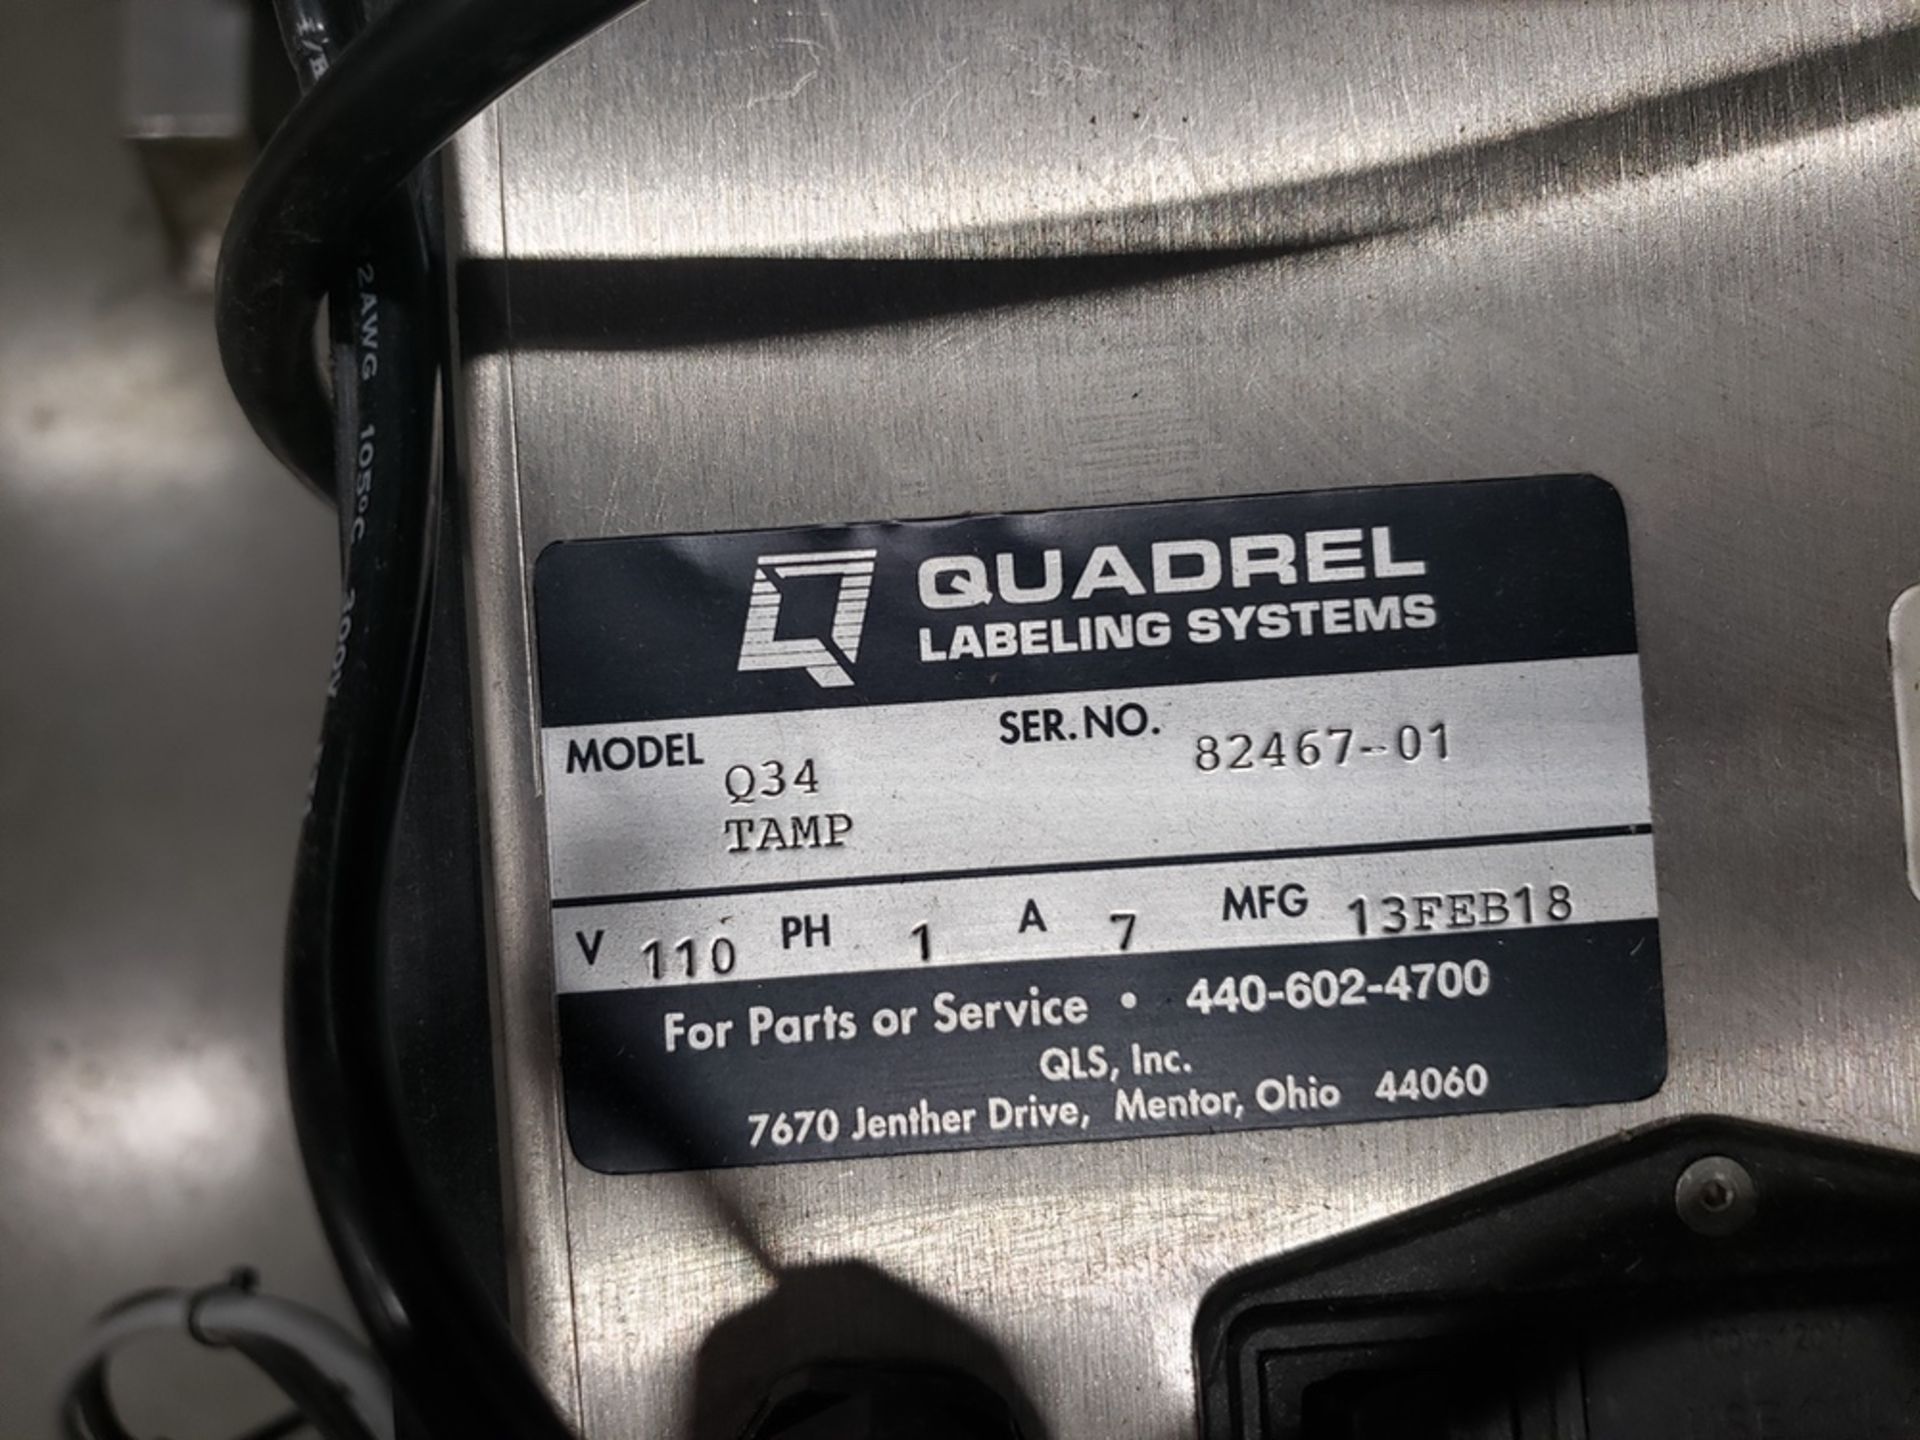 2018 Quadrel Labeling Systems, M# Q34 TAMP, S/N 82467-01 | Rig Fee: $125 - Image 2 of 2